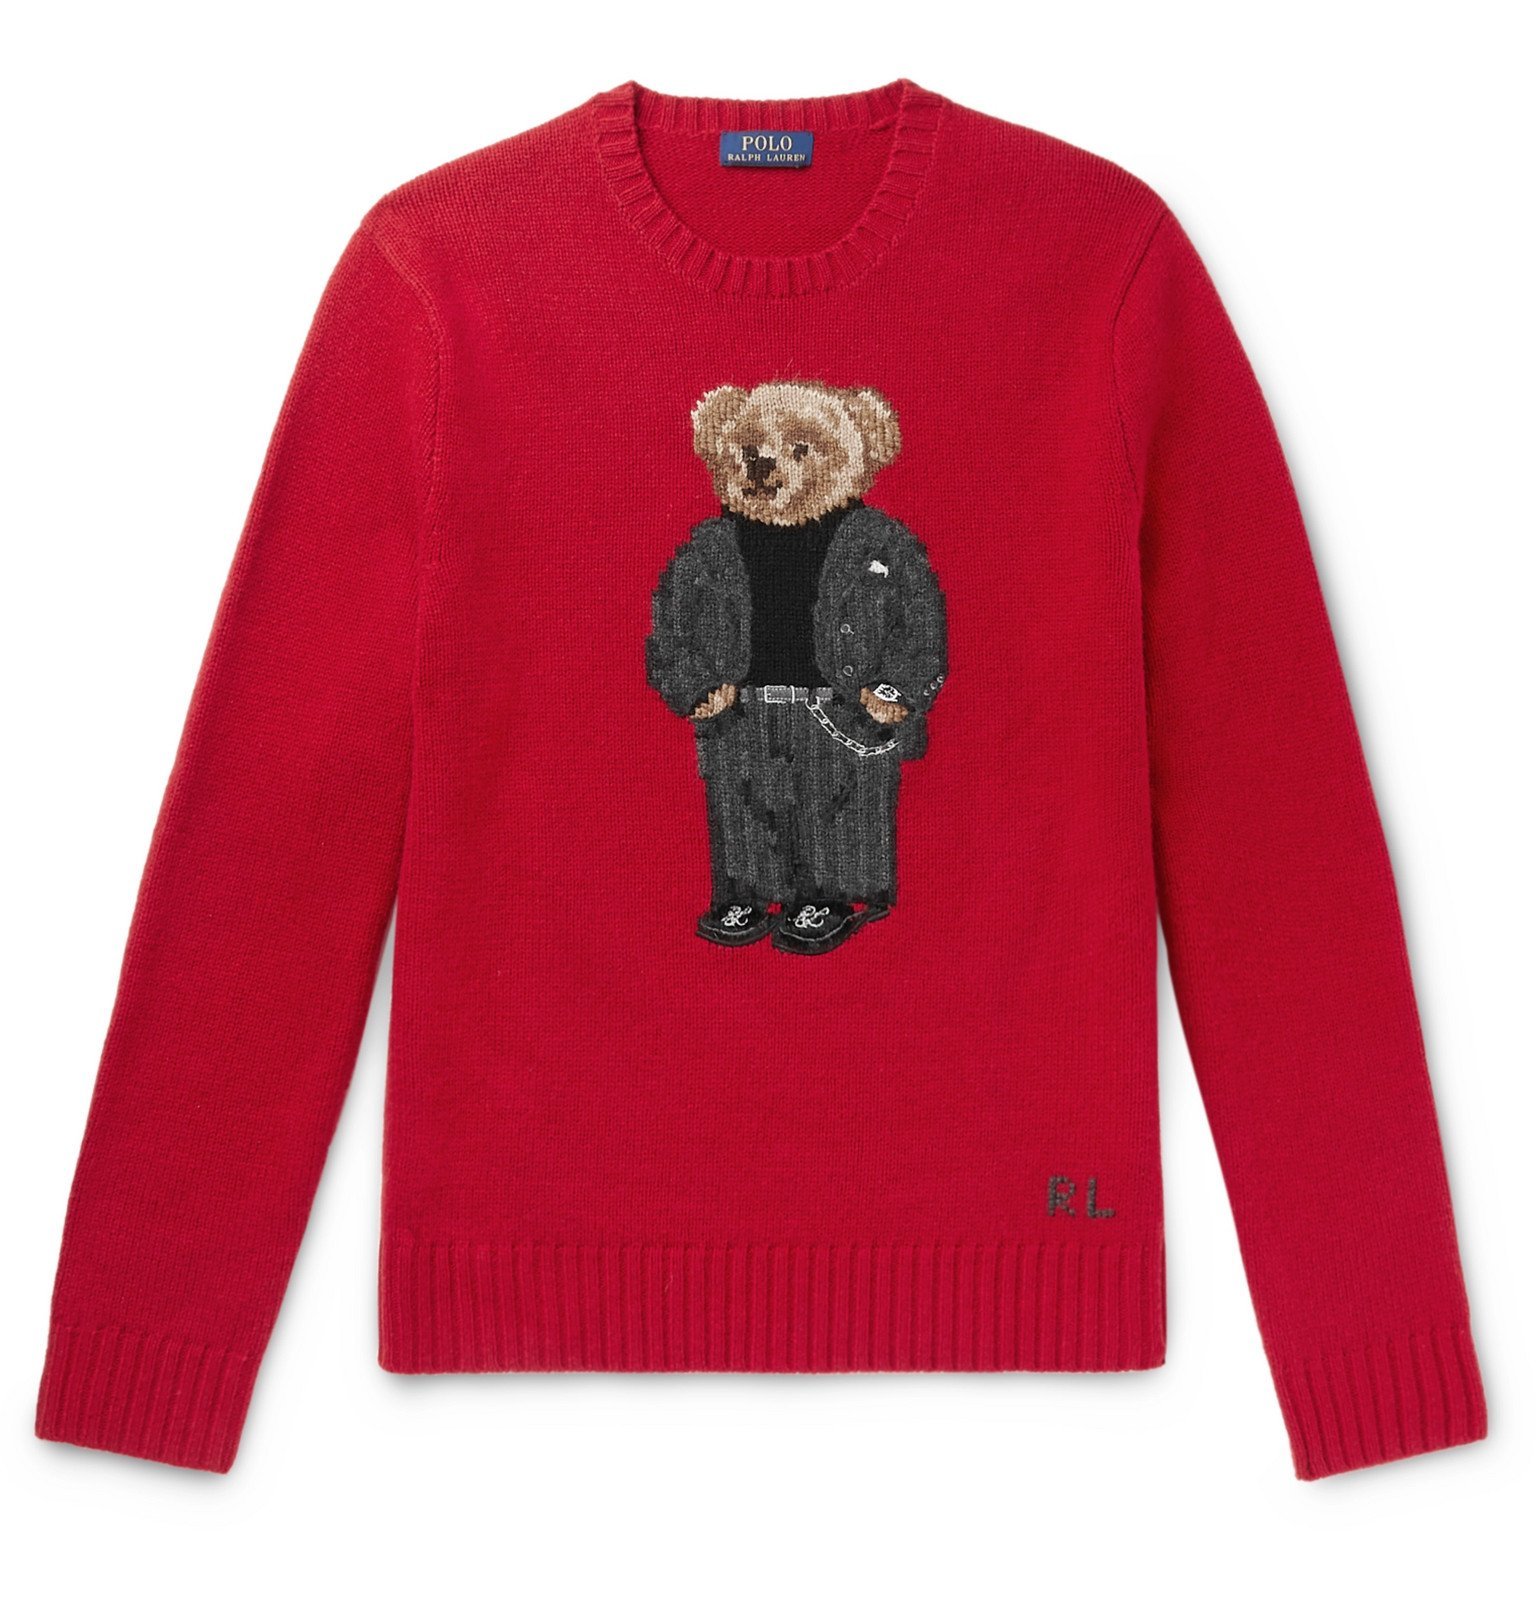 polo bear sweater red